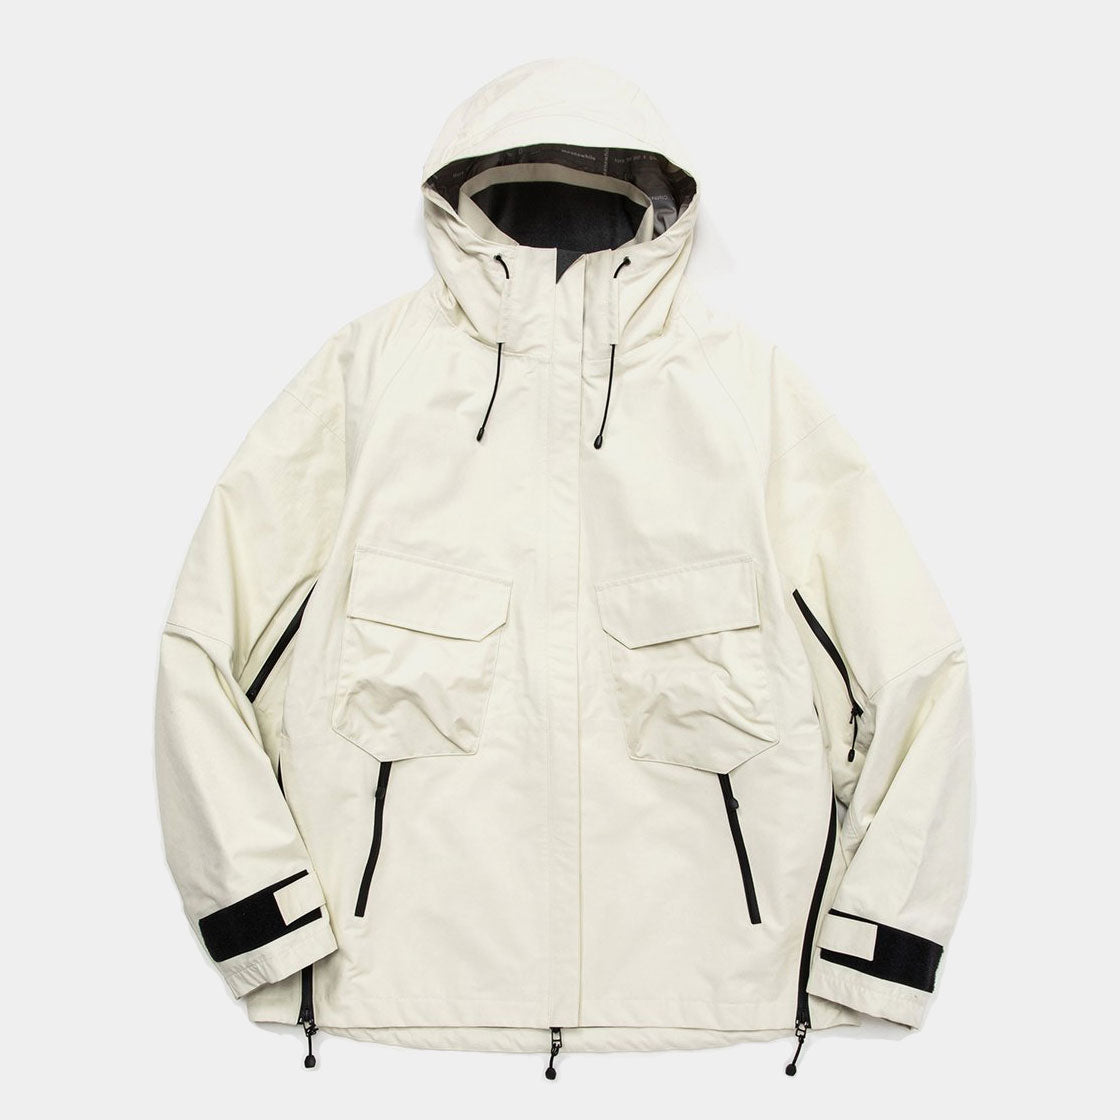 Field Shell JKT (SNOW) / MW-JKT21201 – meanswhile 公式オンラインストア